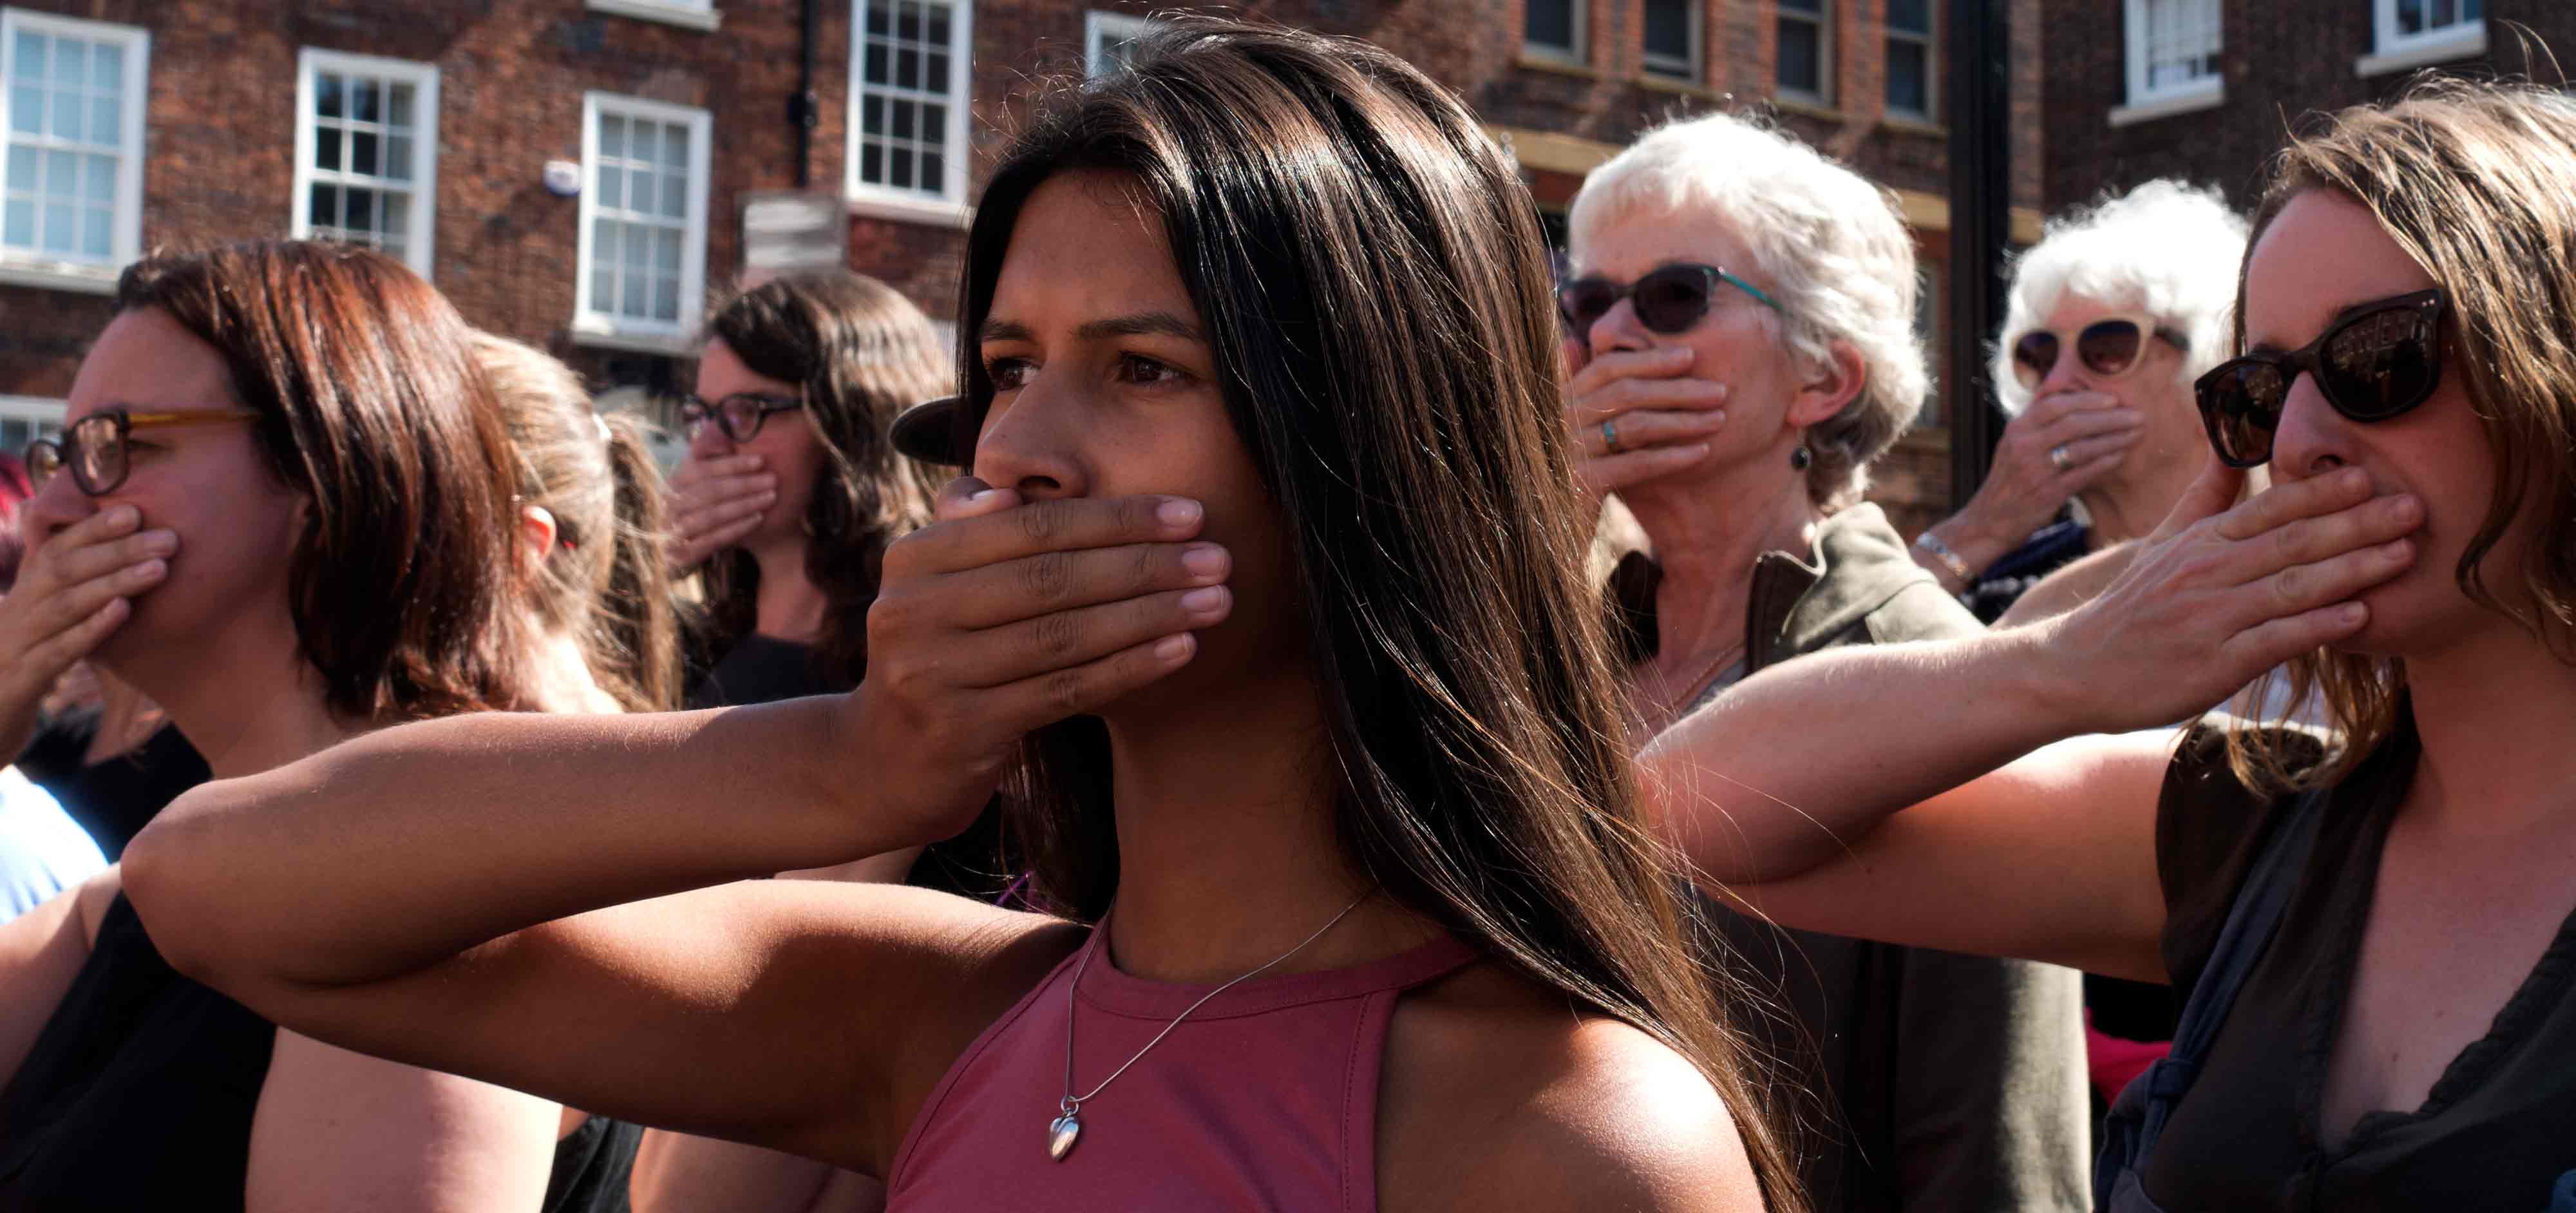 Women hold their hands over their mouths as part of Chloë Brown's 'A Soft Rebellion in Paradise'